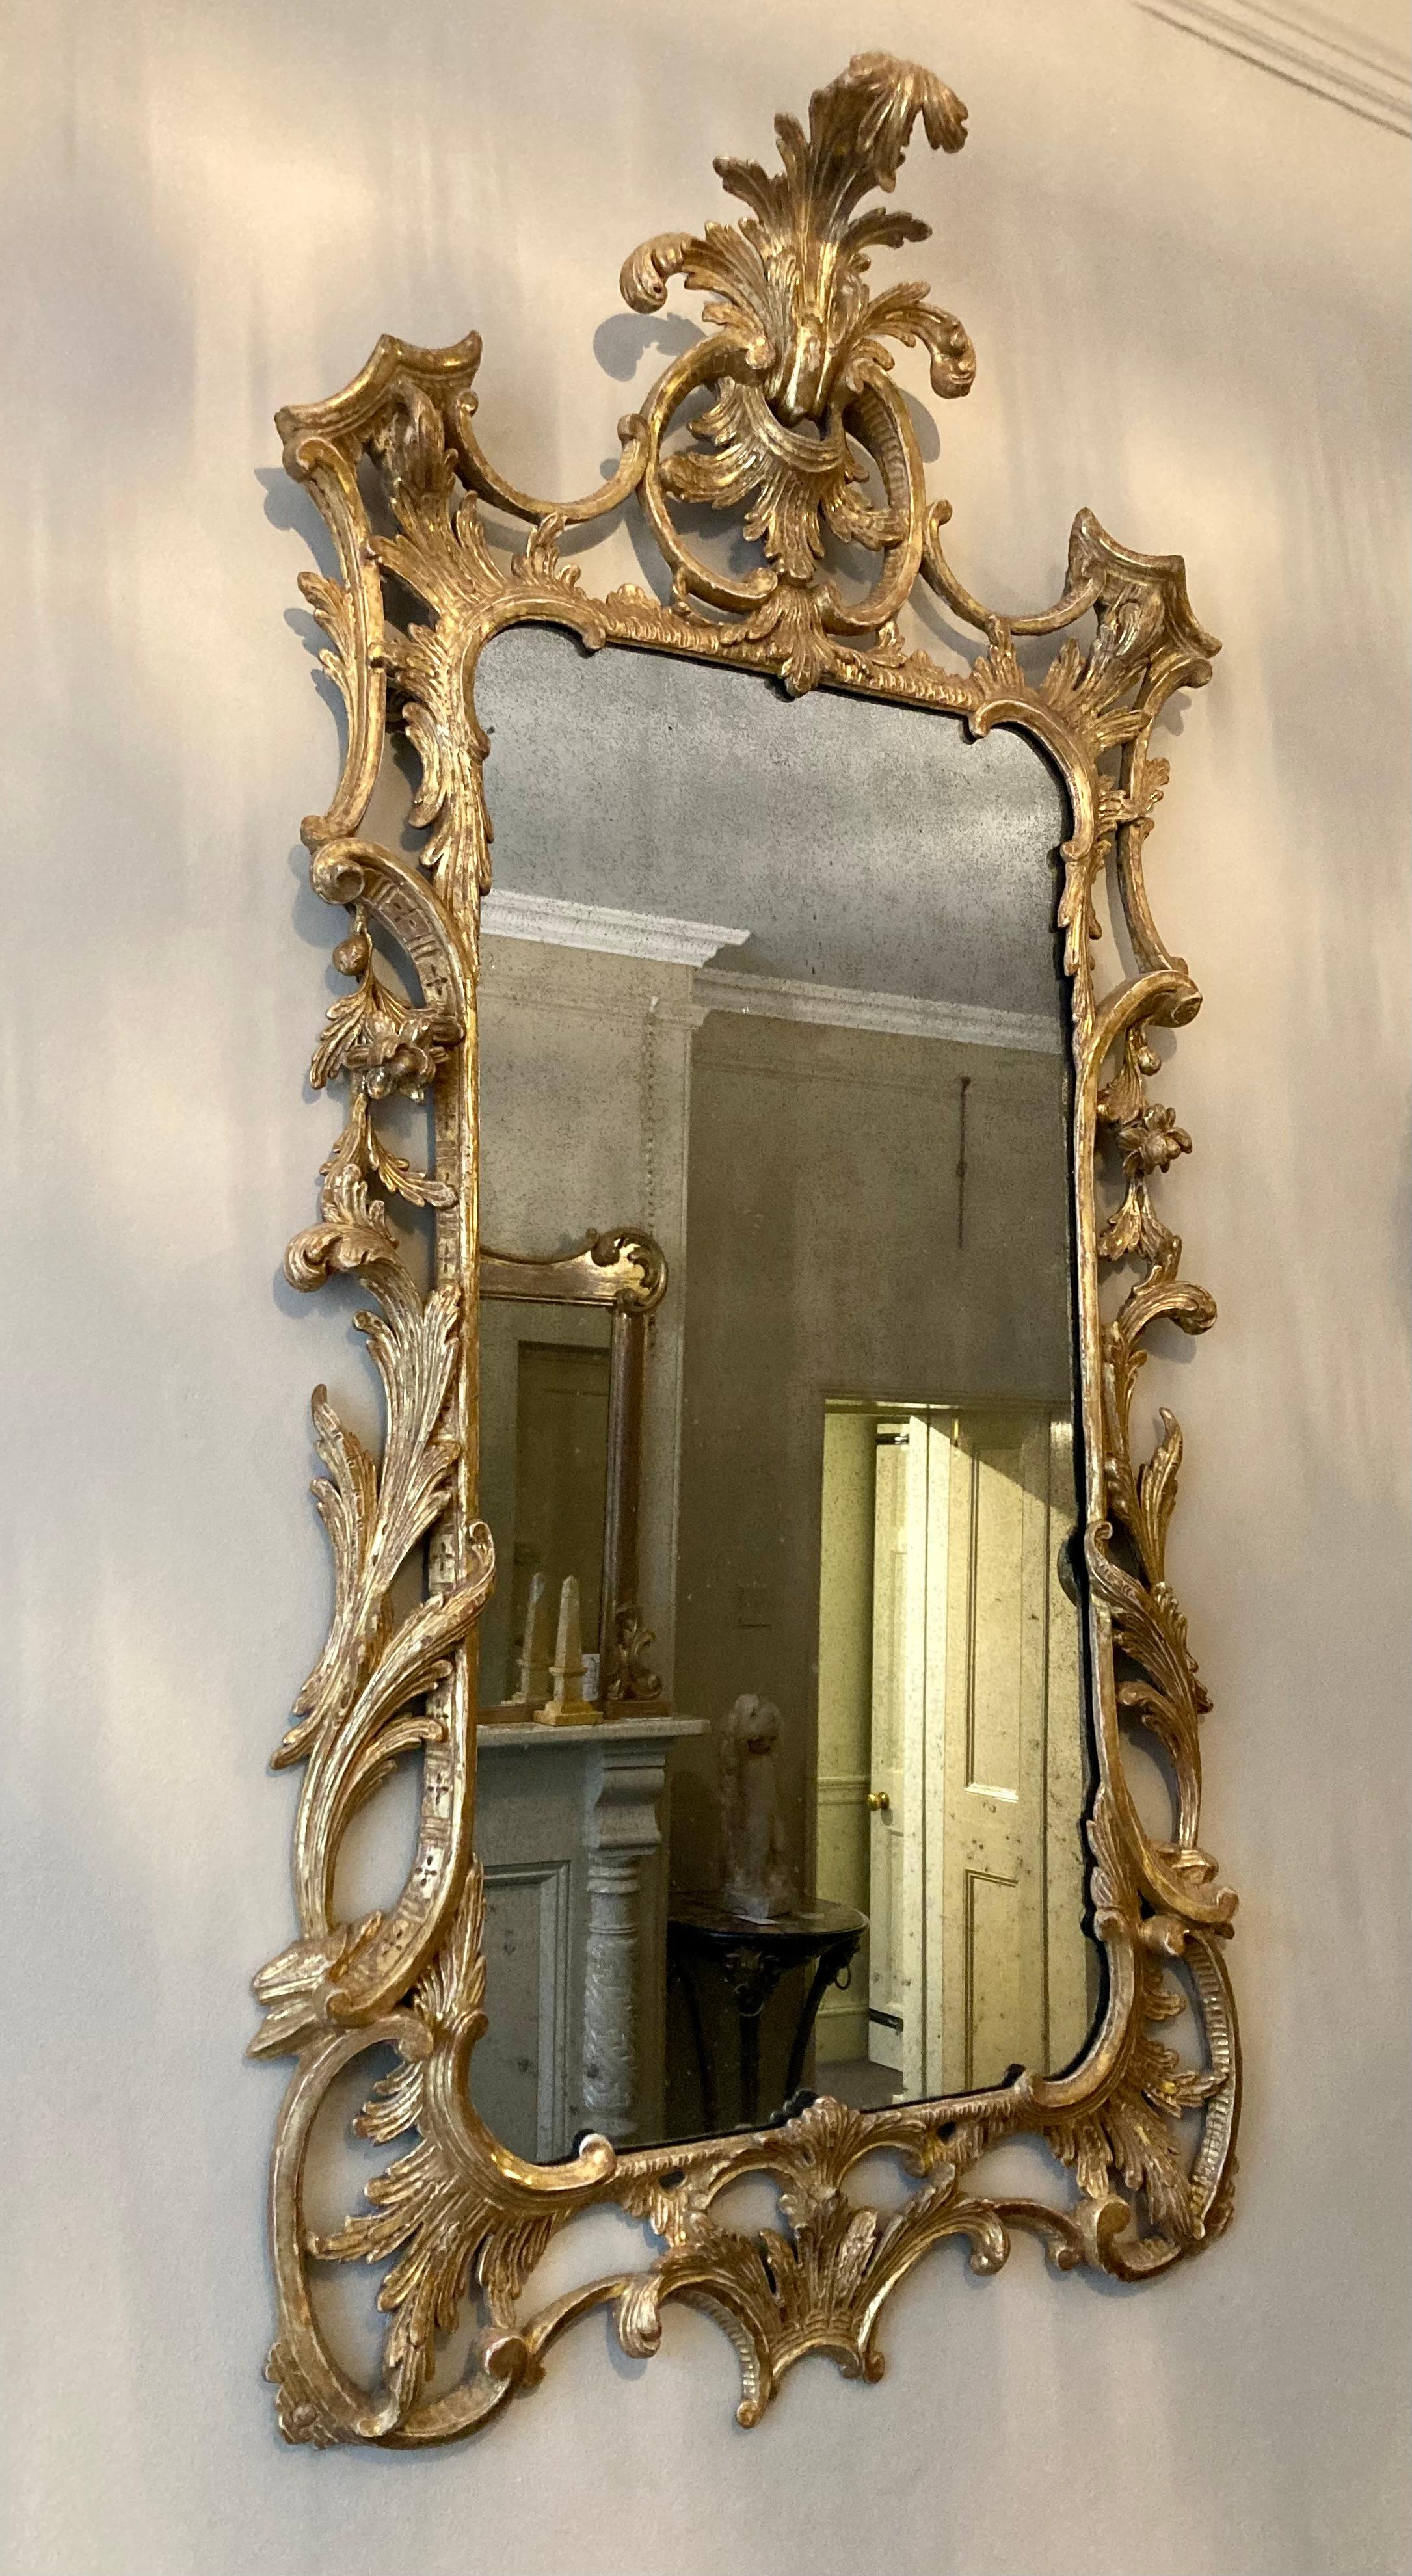 A beautifully proportioned carved  18th century period giltwood Chippendale wall mirror with acanthus leaf top, supported on 'C' shaped scrolls and trailing foliage surmounted on crisply carved leaf supports. The apron is decorated with 'C' scrolls